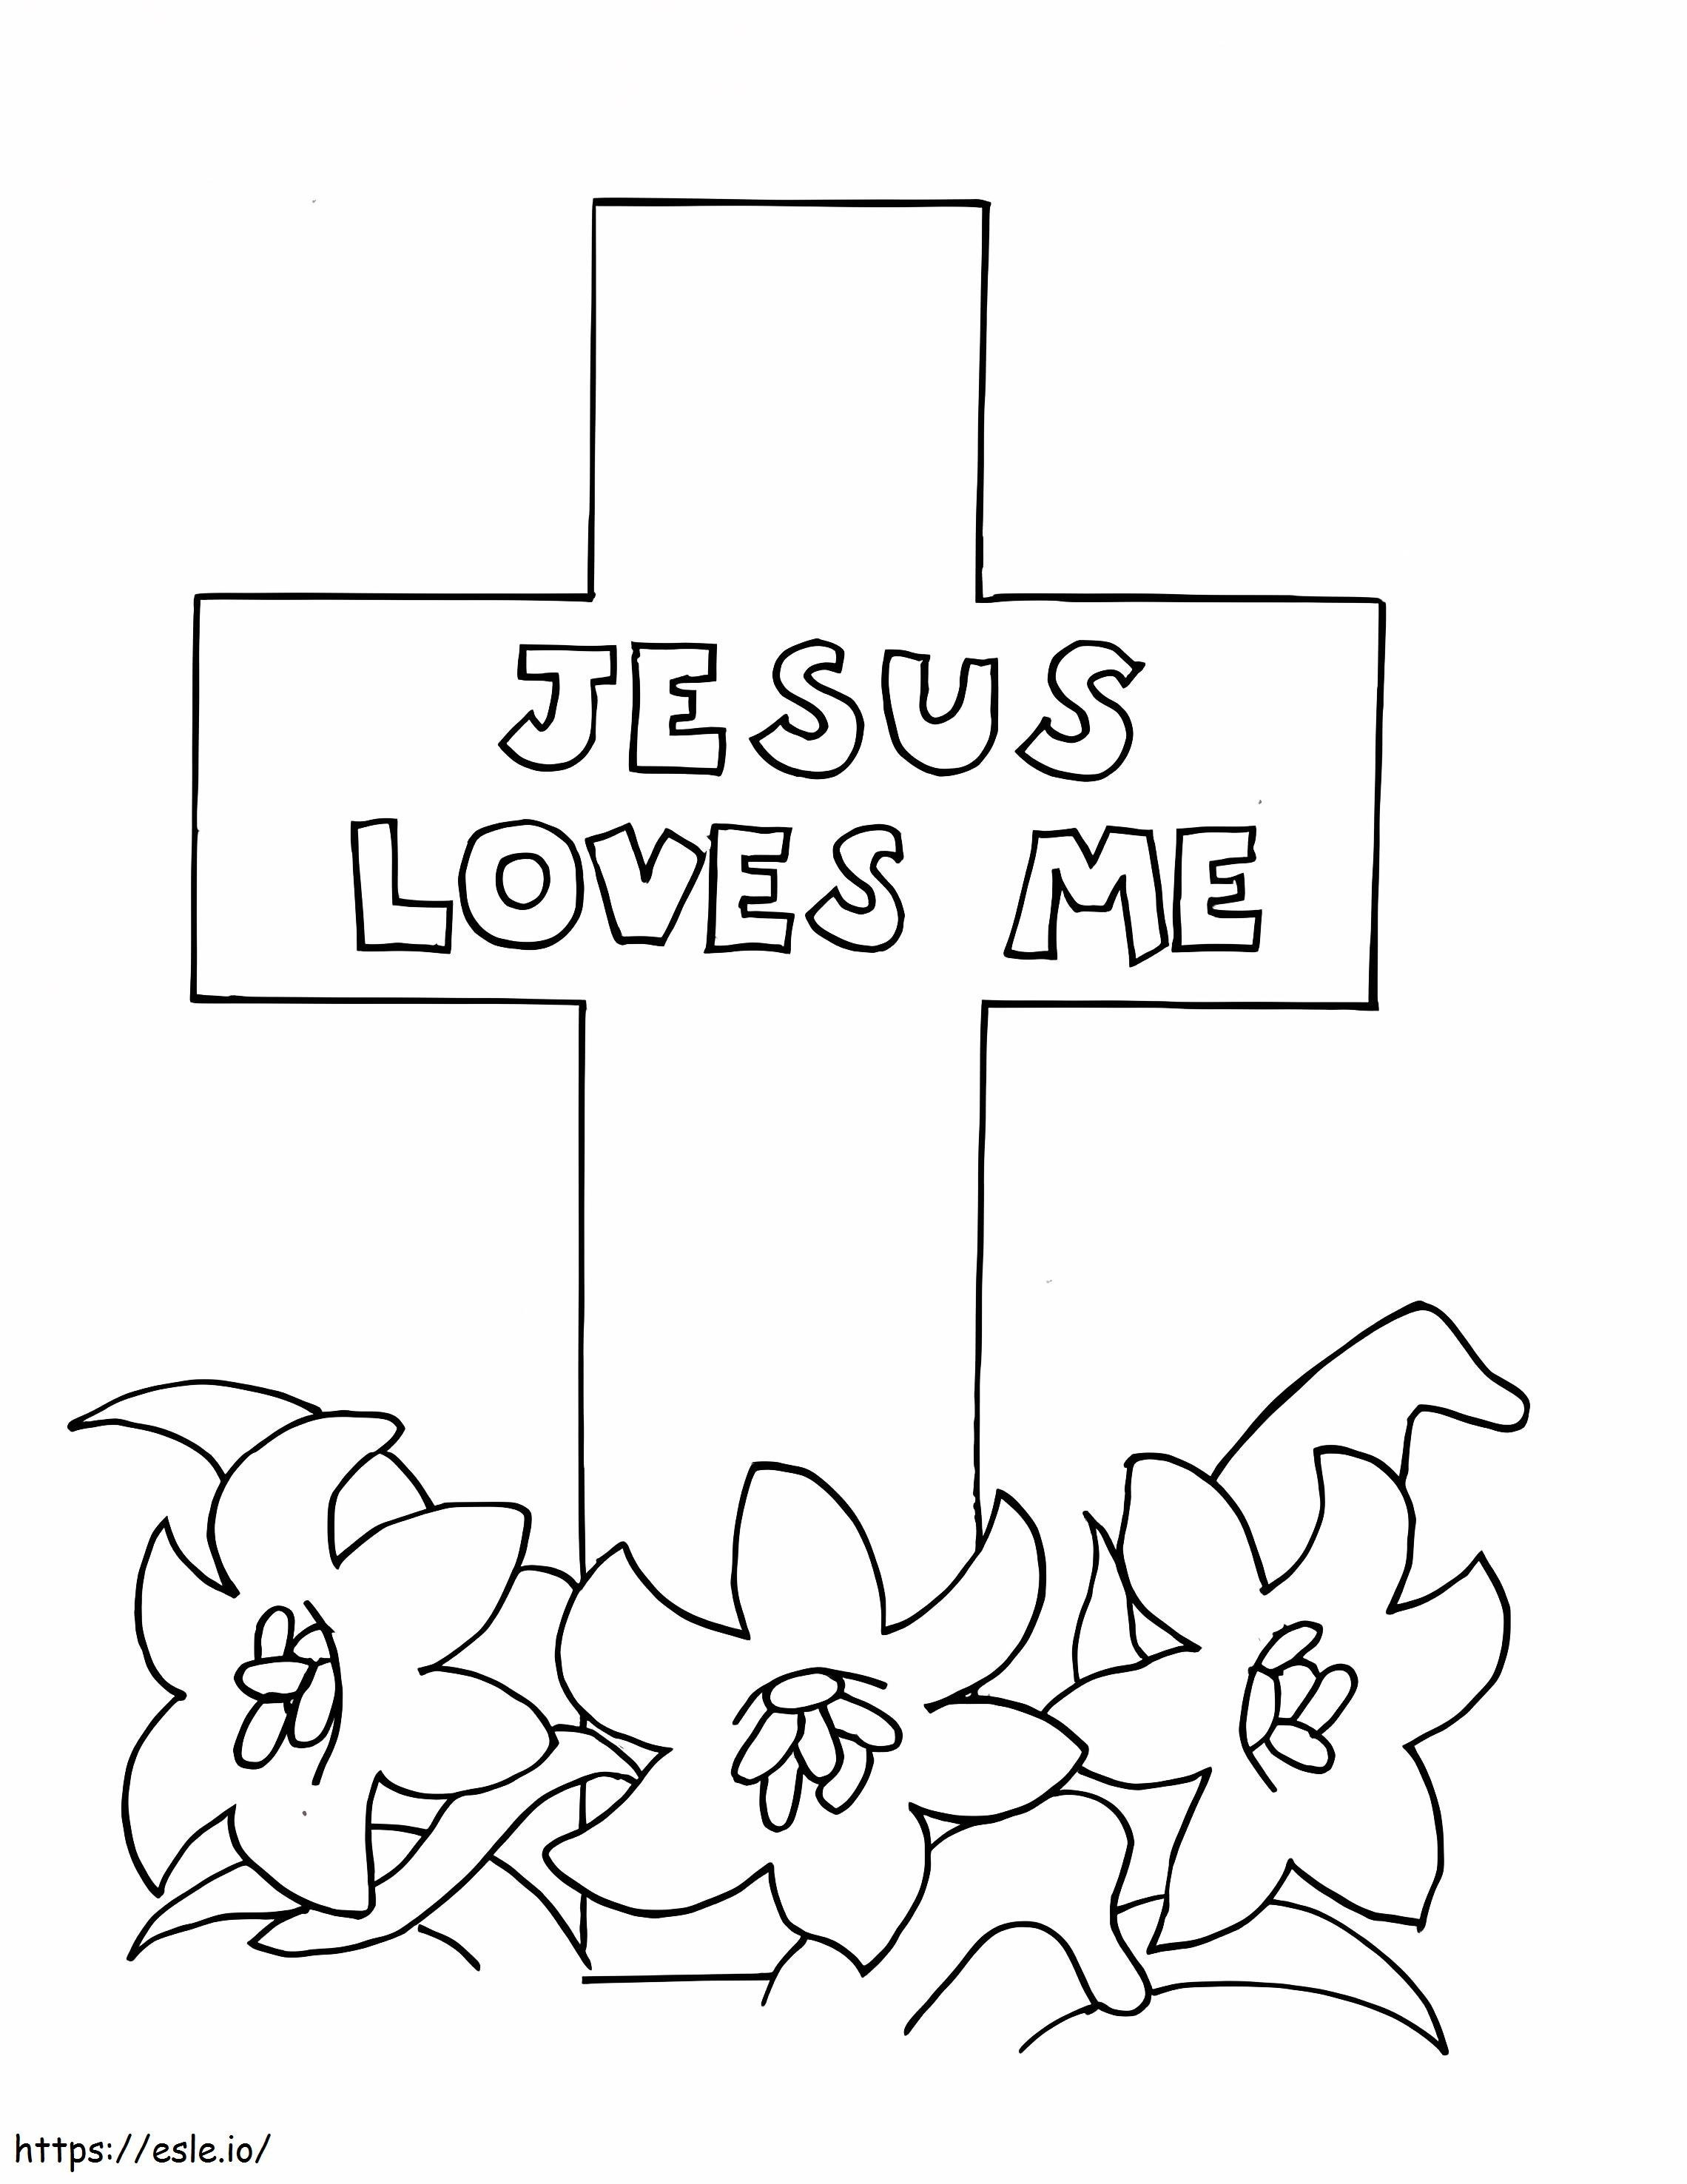 Good Friday 4 coloring page